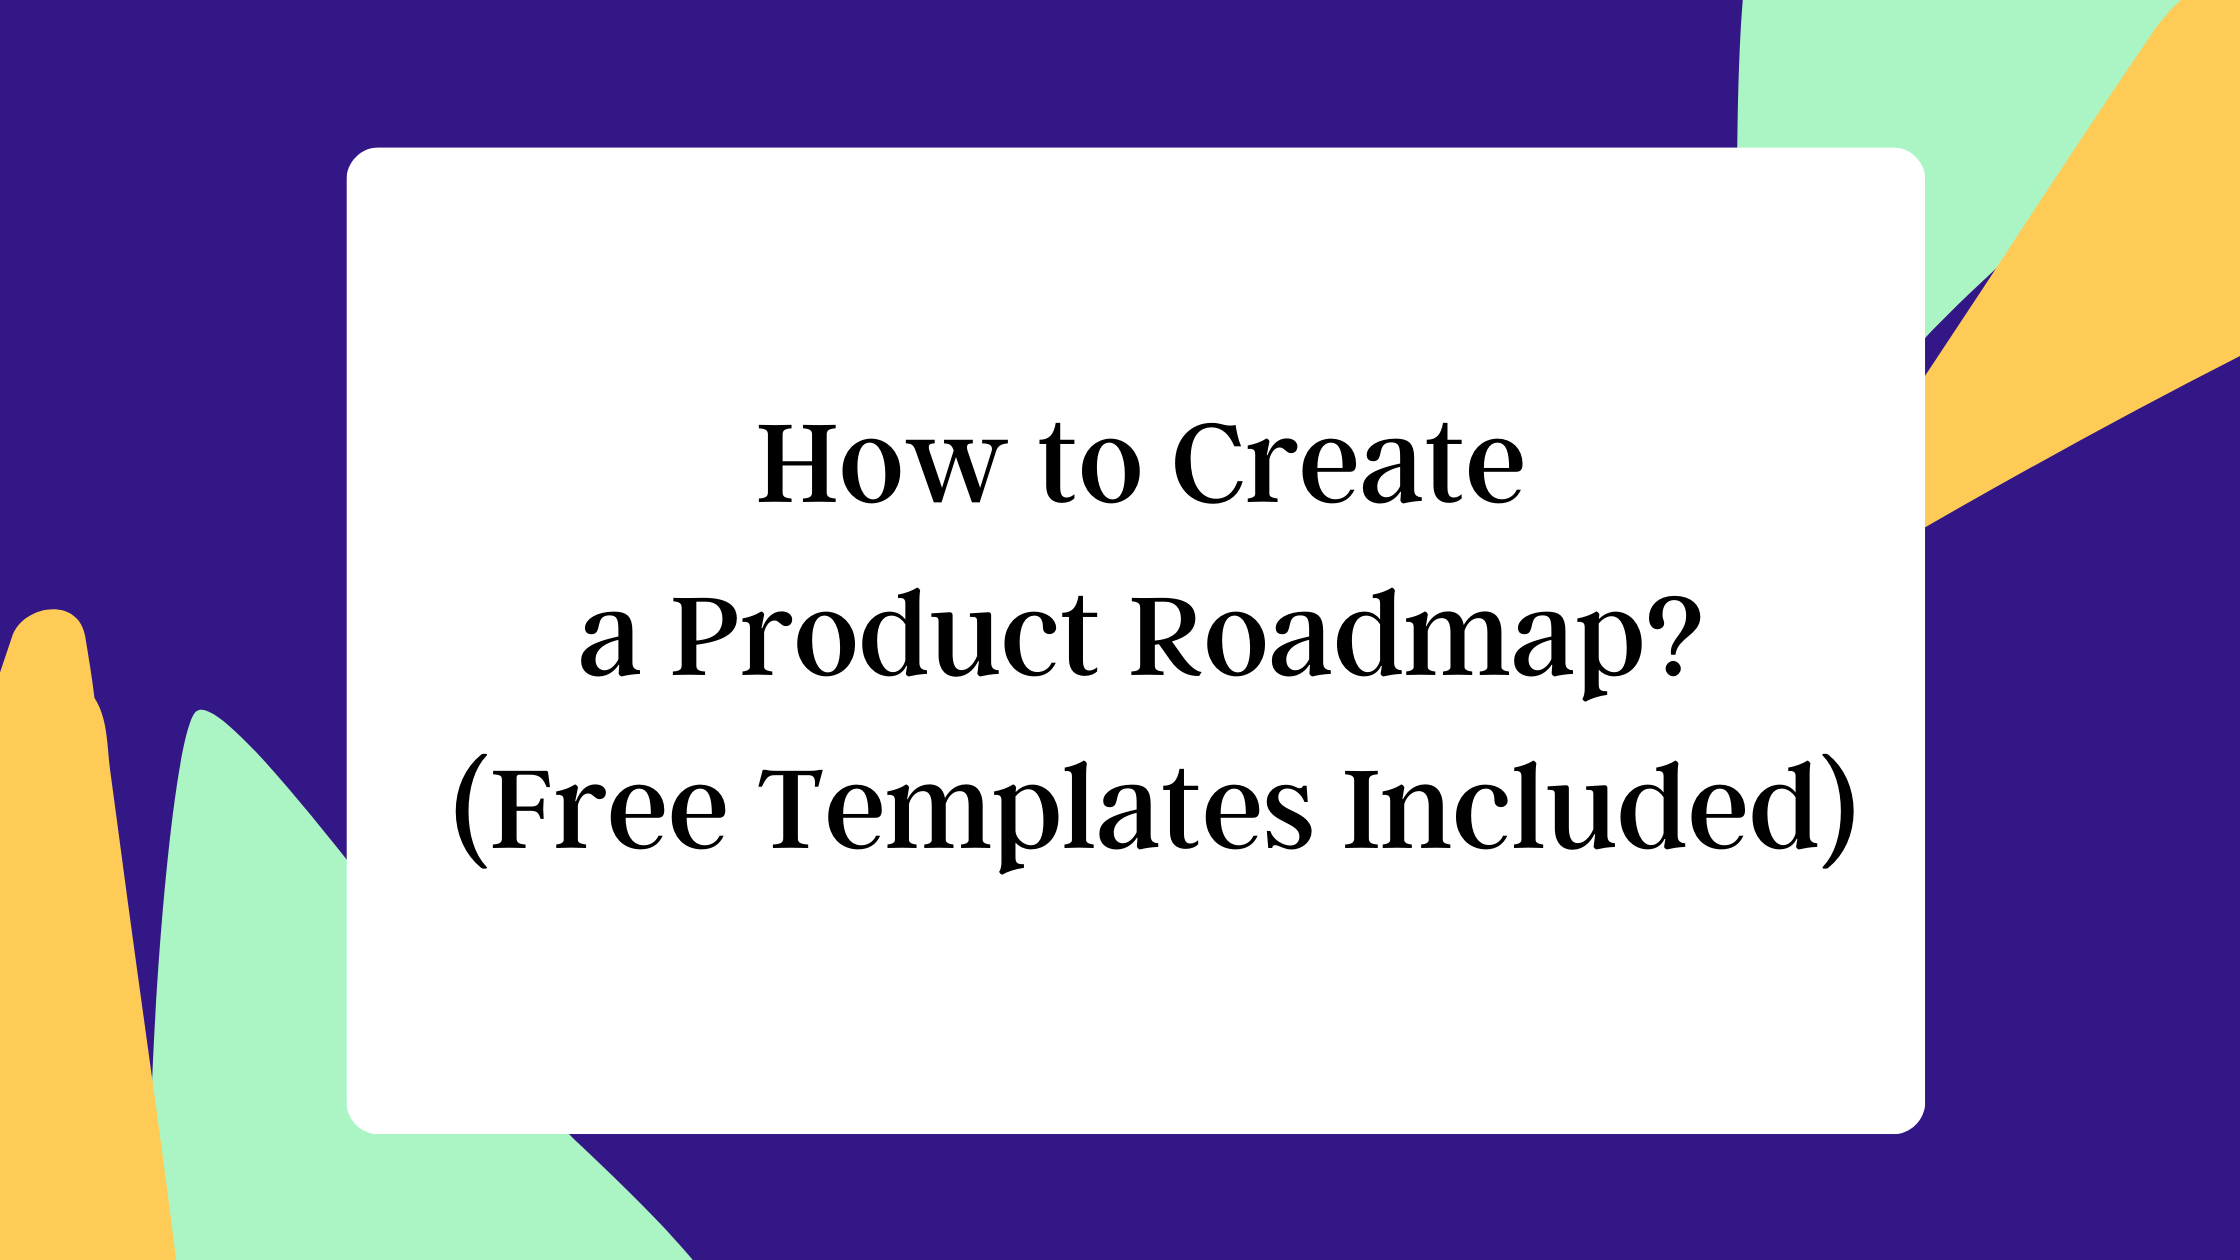 How to Create a Product Roadmap? (Free Templates Included)